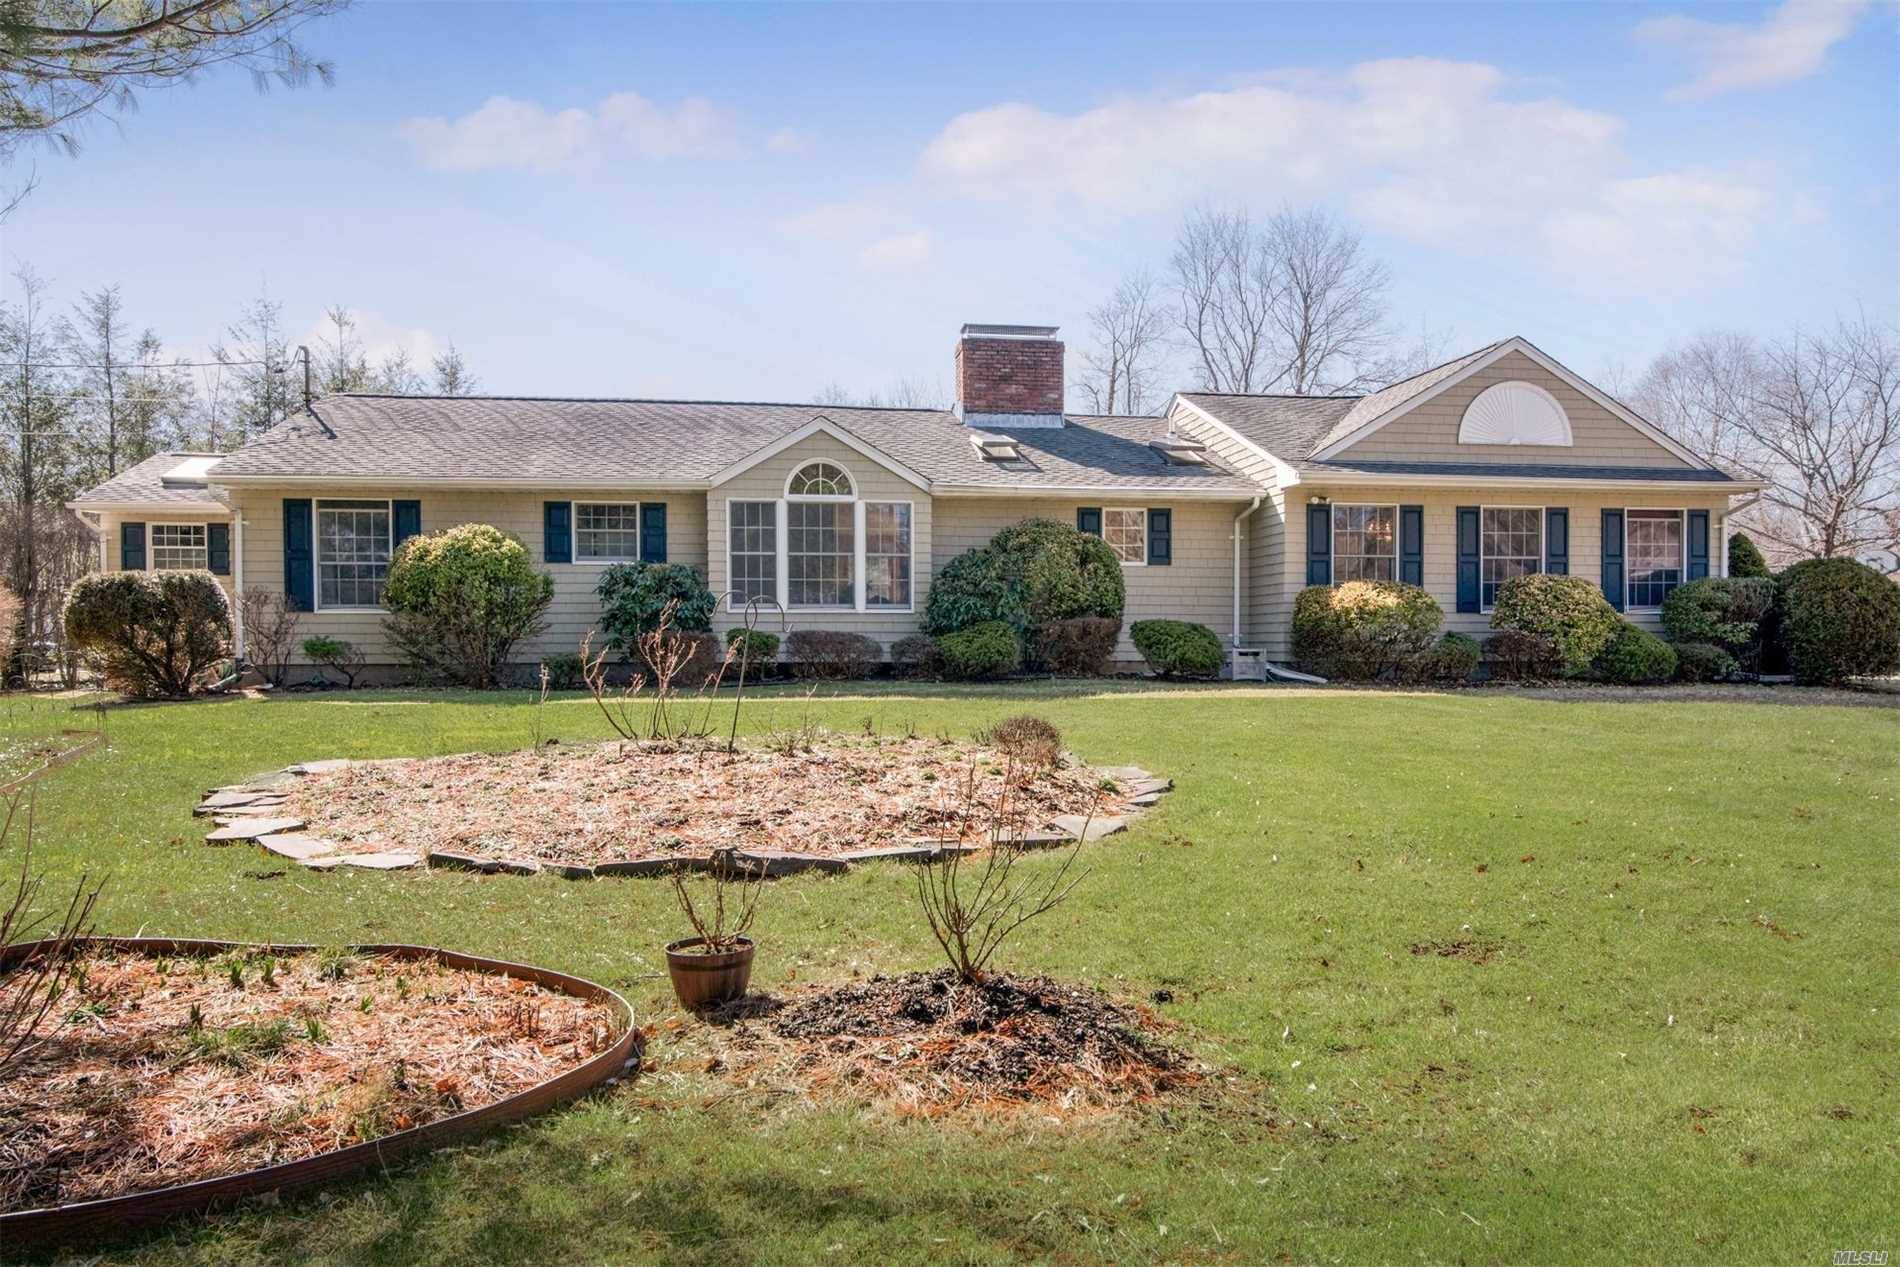 Deeded Beach & Mooring Rights Come W/This Redesigned Strongs Neck Delightful Ranch Set On 0.